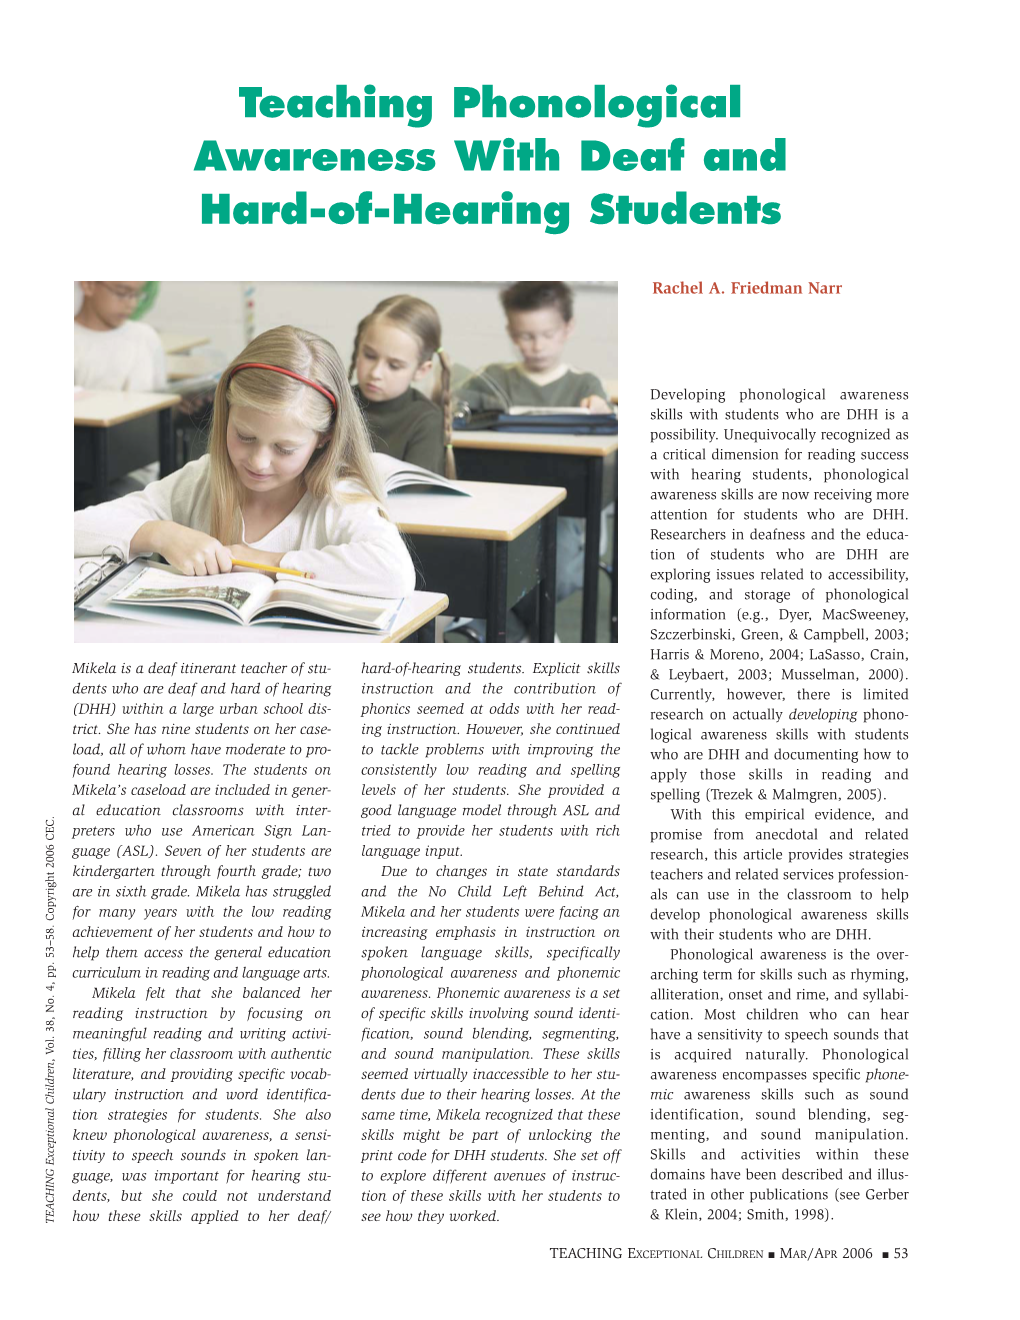 Teaching Phonological Awareness with Deaf and Hard-Of-Hearing Students